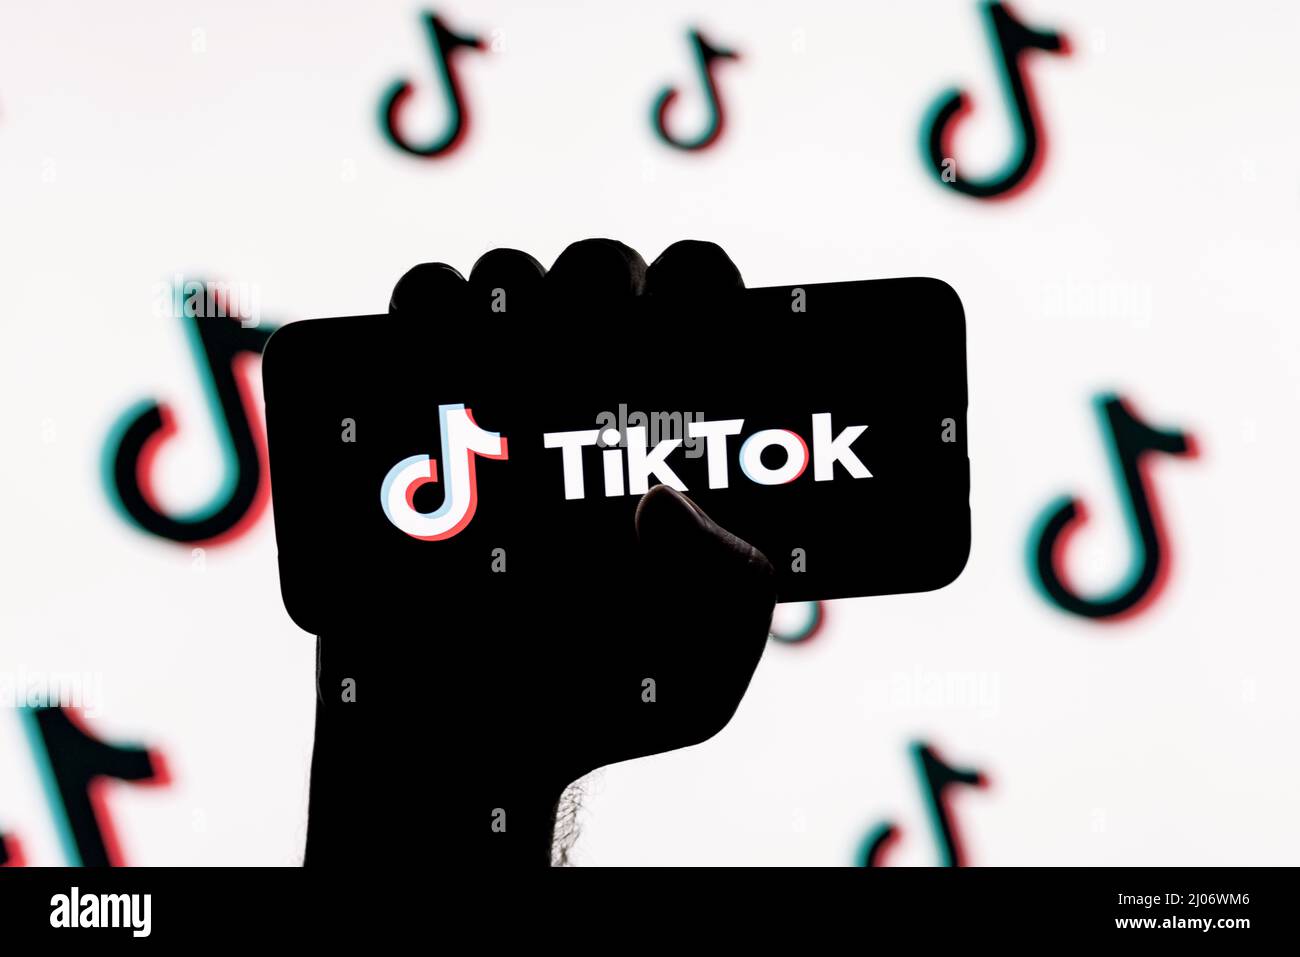 Smartphone with the TikTok social network logo on the screen in a clenched hand on the background of TikTok logos Stock Photo